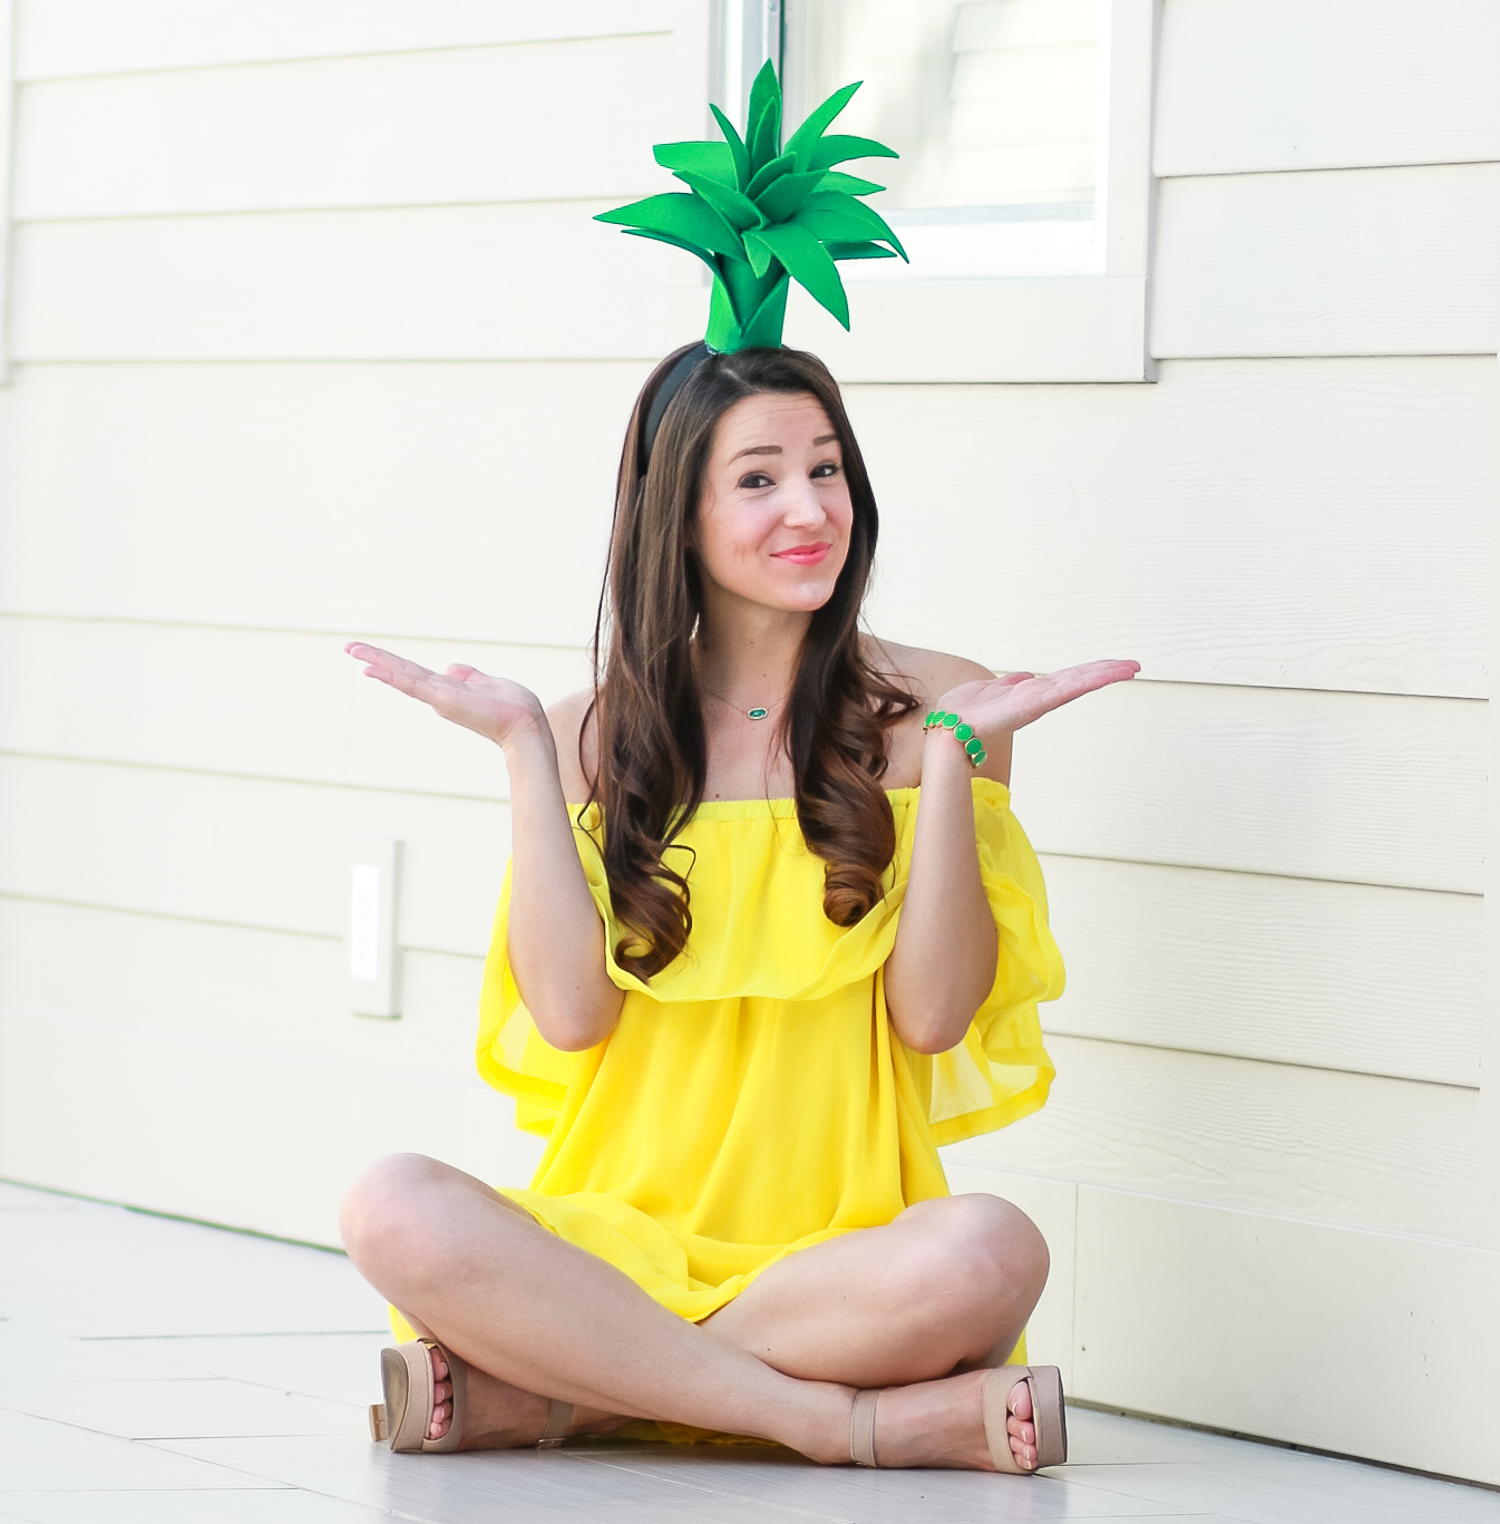 Super simple $3 pineapple Halloween costume idea | Easy DIY Halloween costume | DIY Pineapple Topper | DIY Pineapple Costume by fashion blogger Stephanie Ziajka from Diary of a Debutante